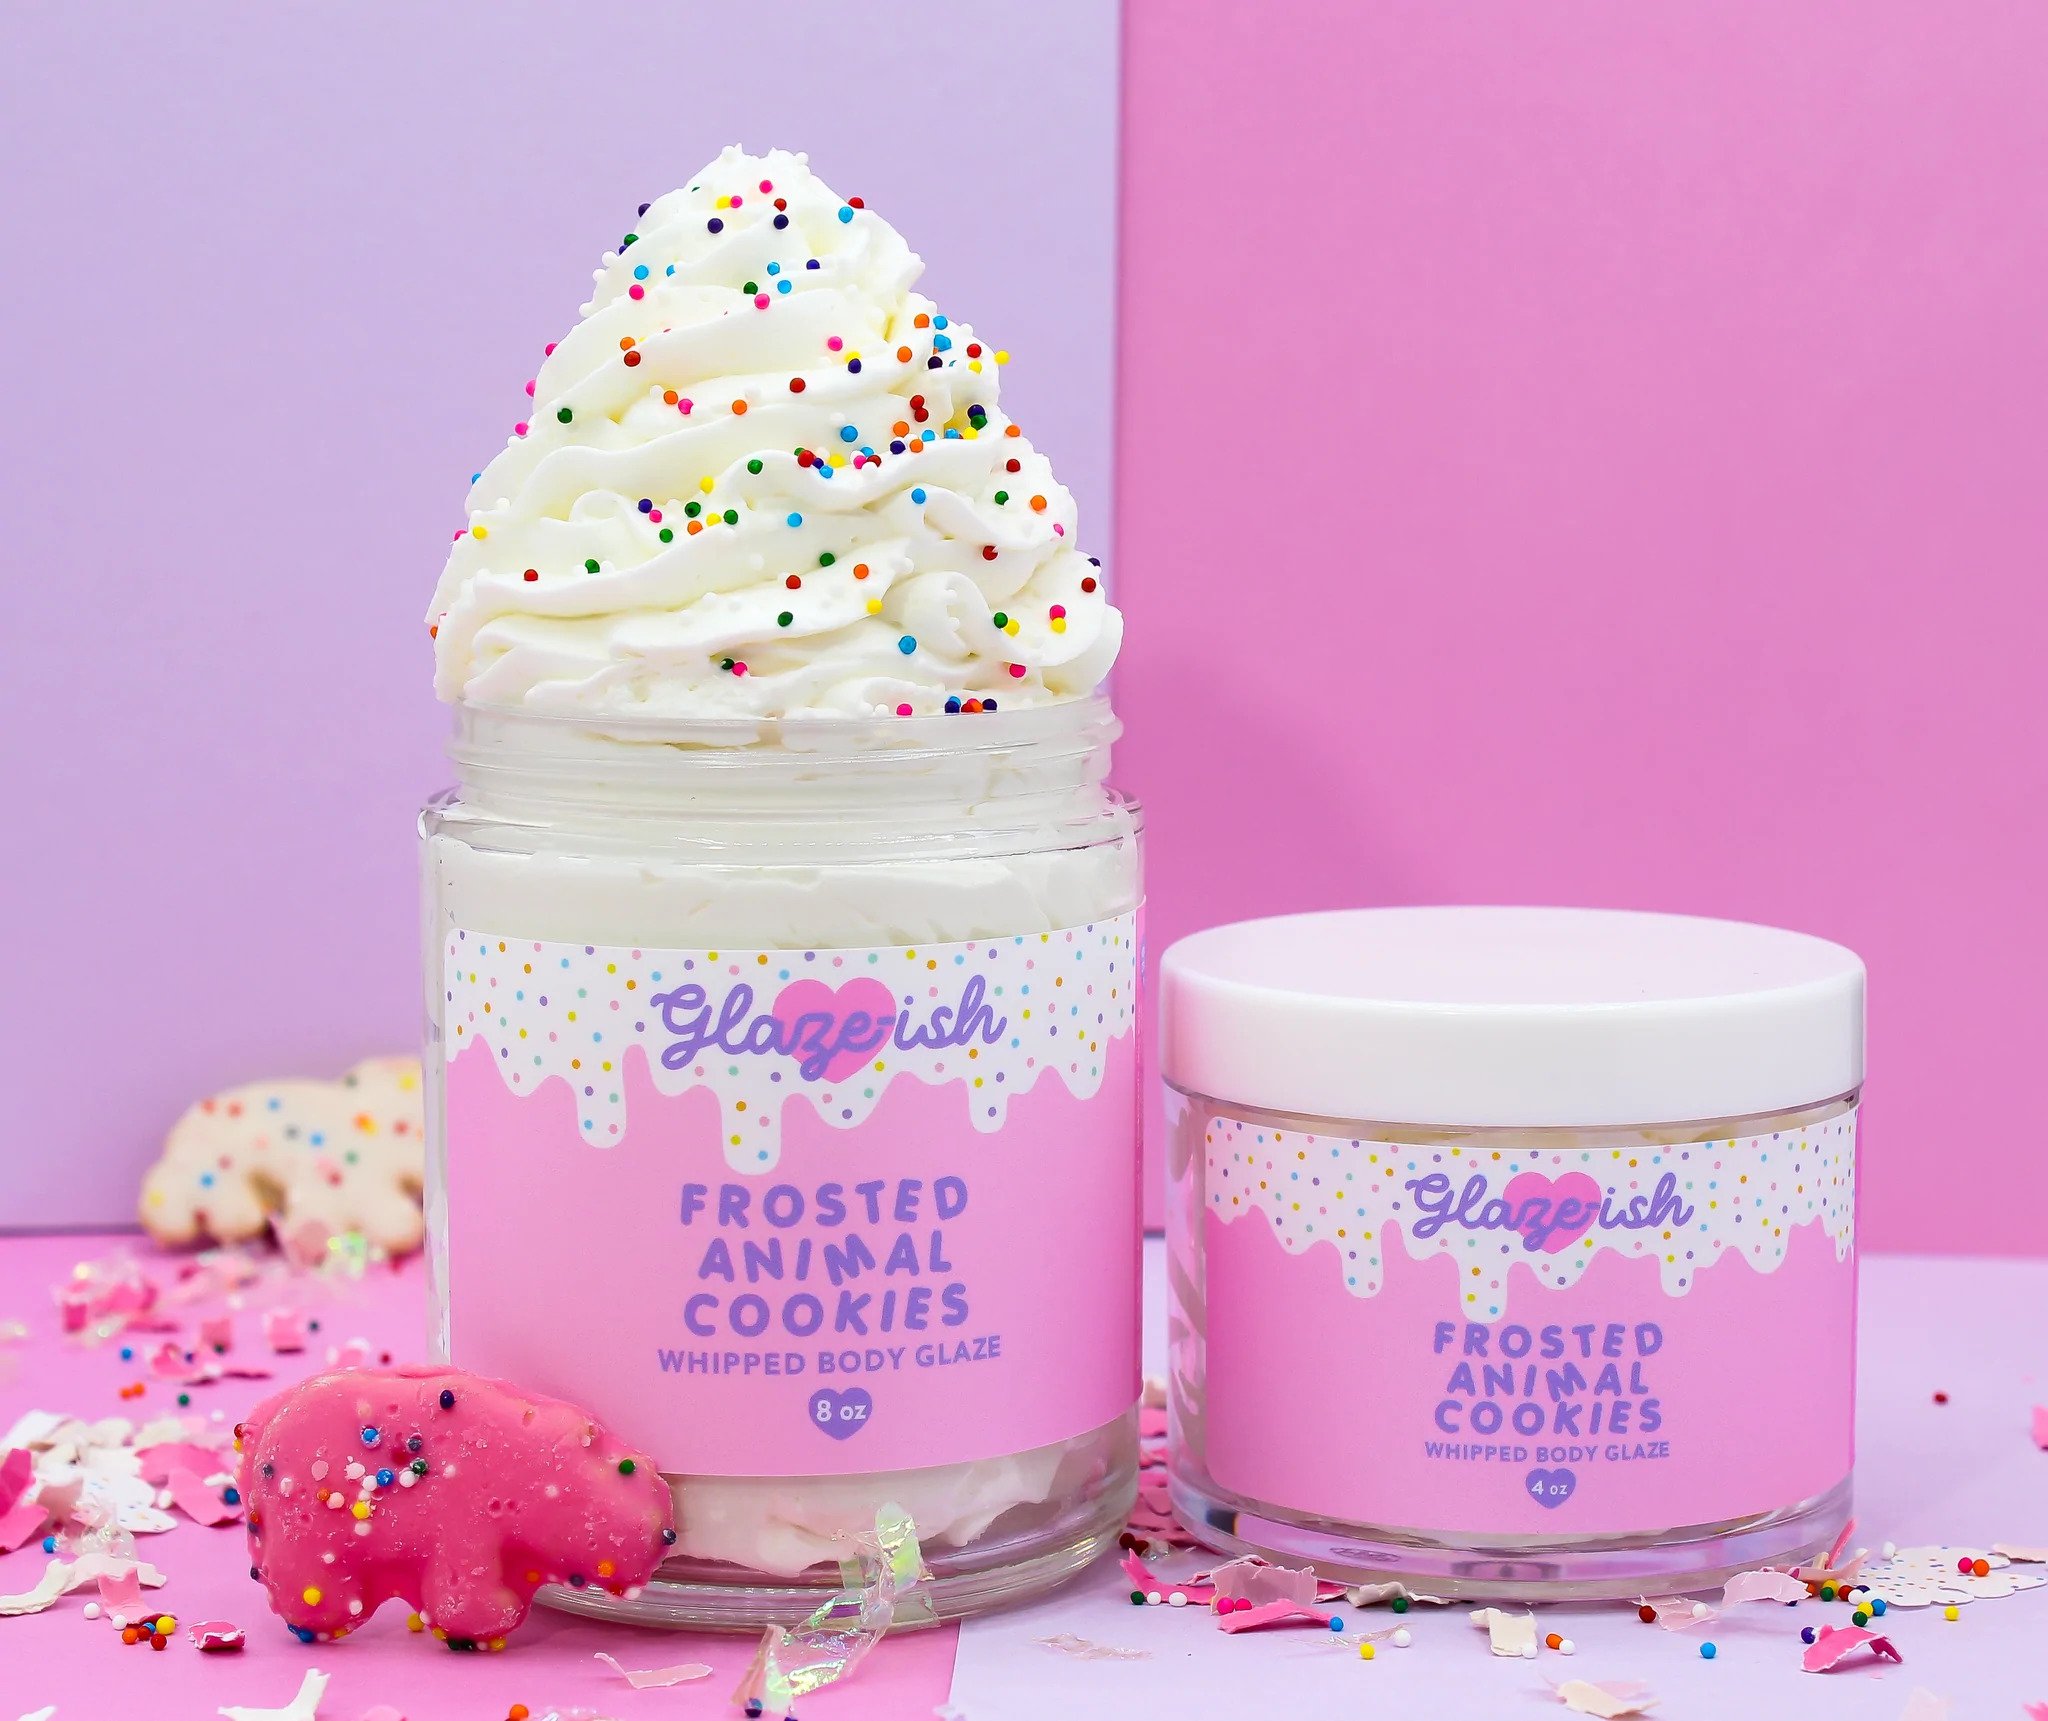 Glaze-ish Frosted Animal Cookies Dessert body butter